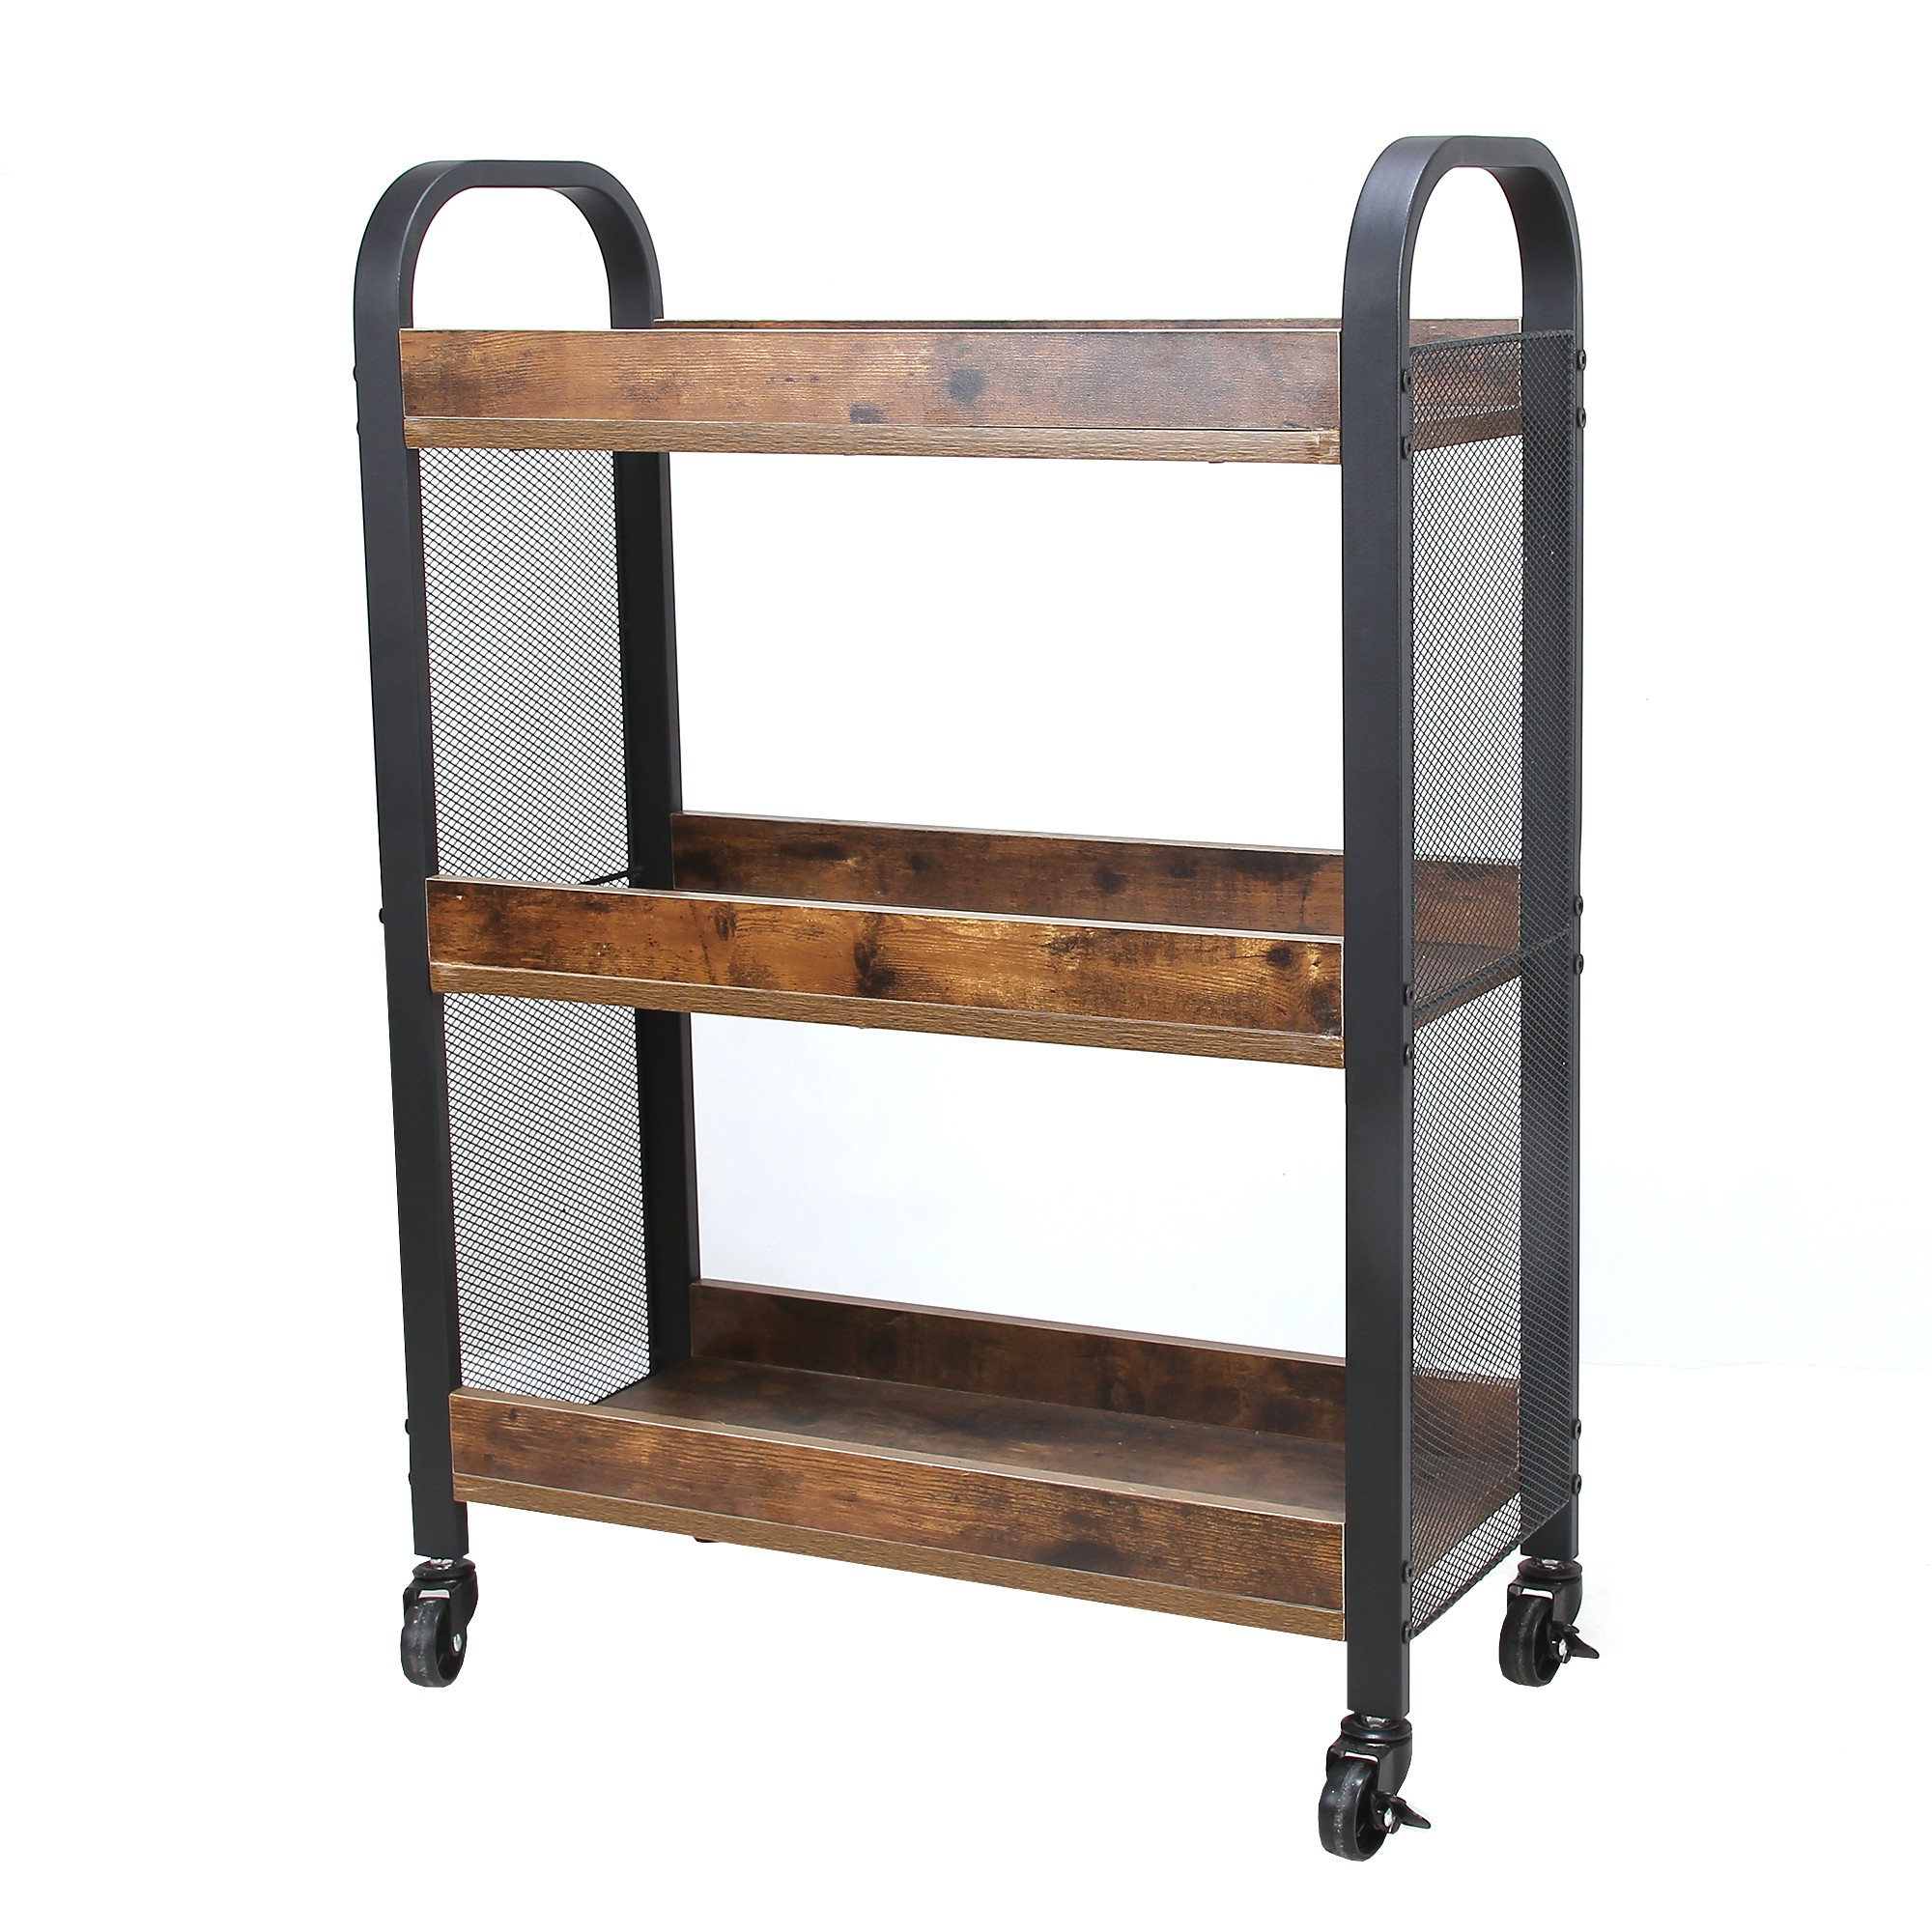 3 Tier Wood and Metal Kitchen Cart with Mesh Side Panel, Brown and Black